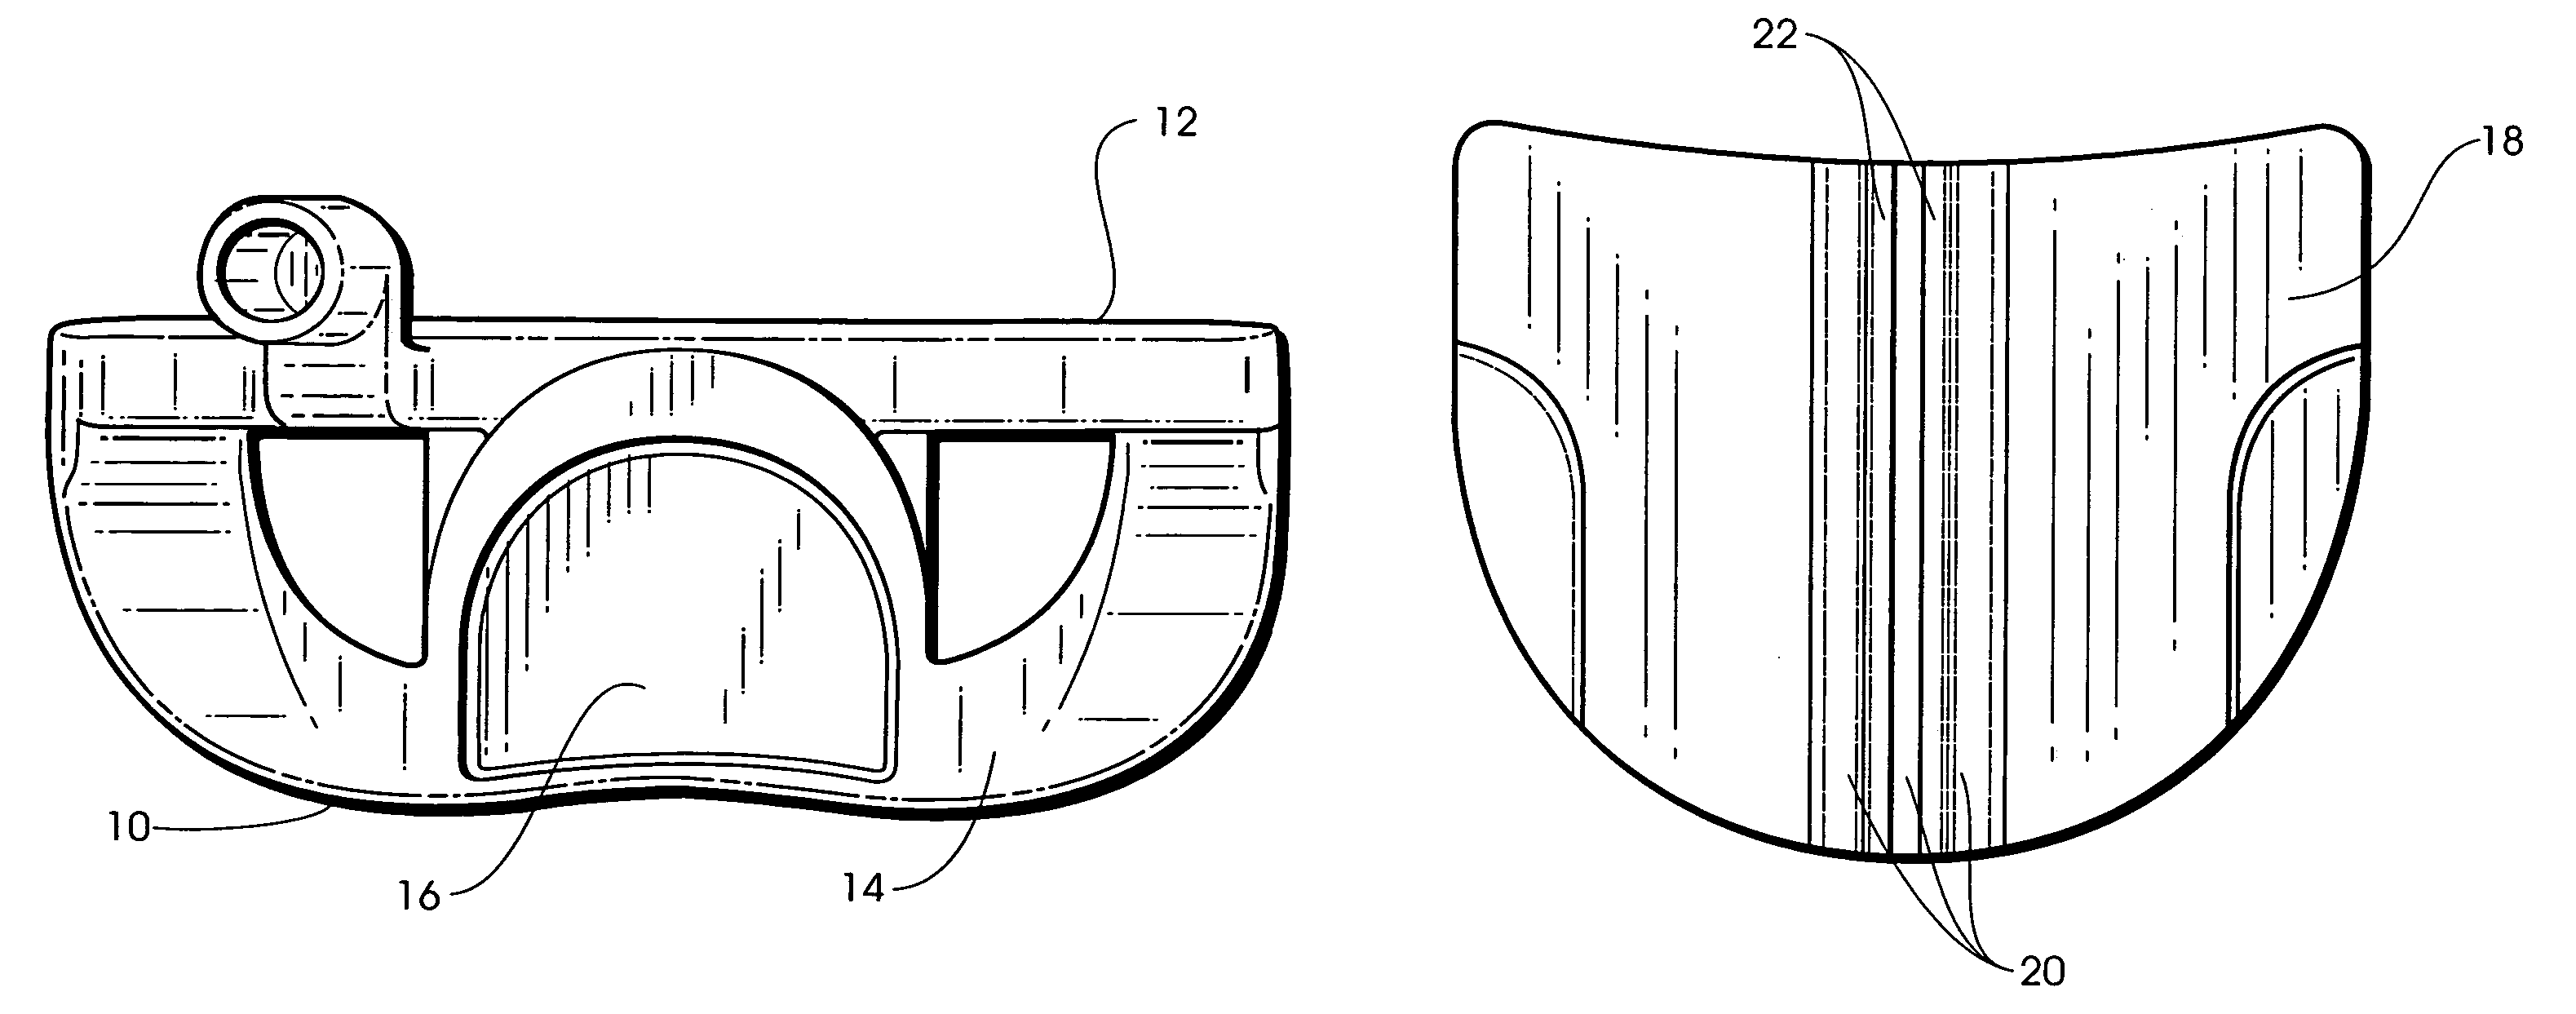 Golf club head with alignment guide